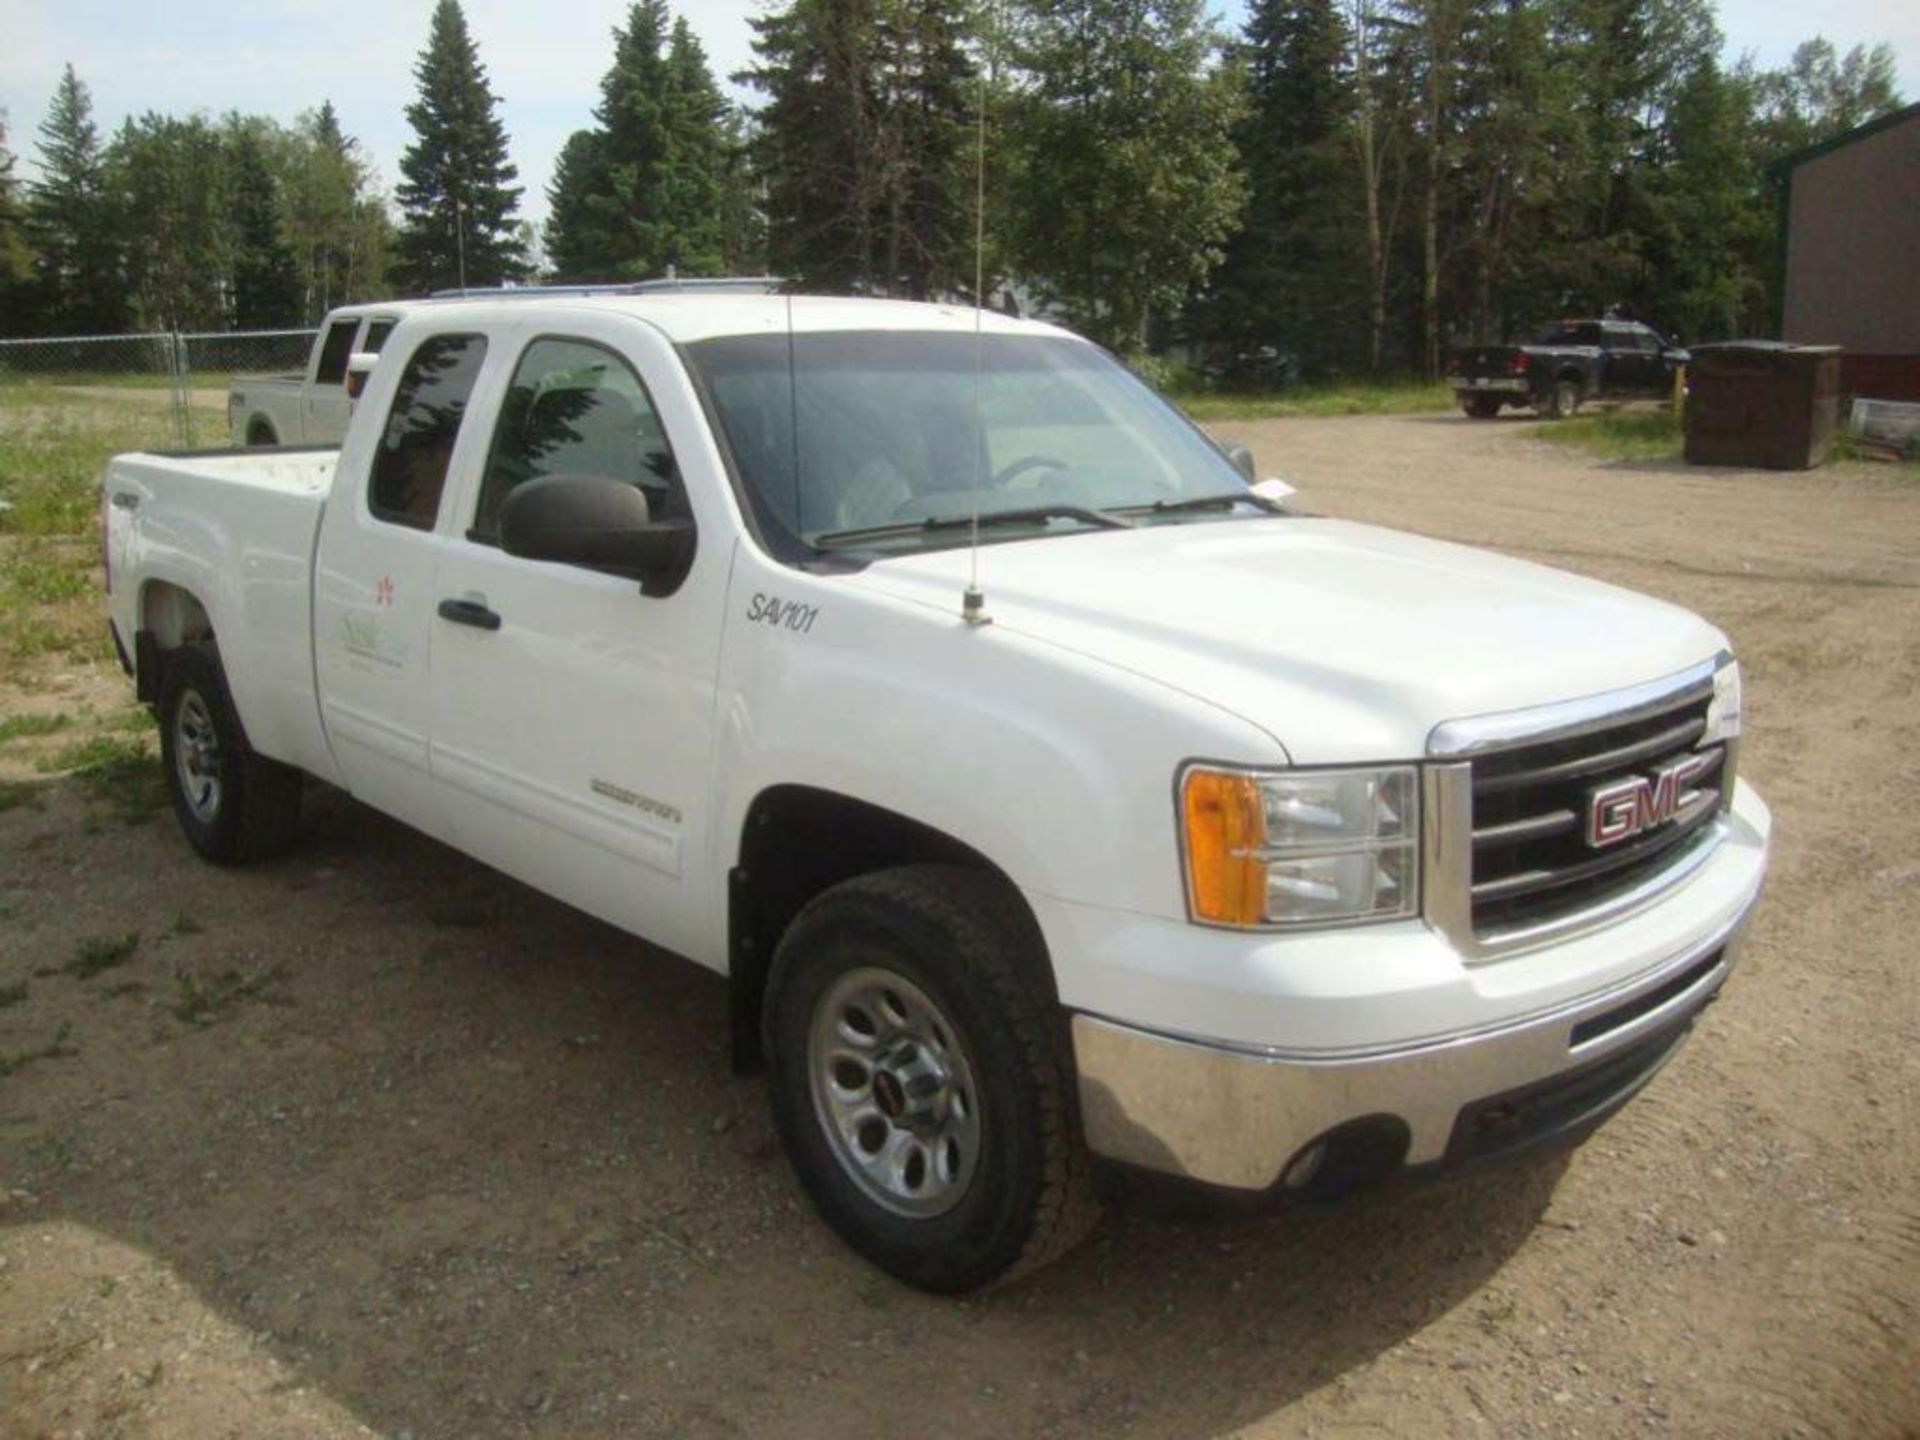 2010 GMC Sierra 1500 Extended cab pick up truck, - Image 2 of 7